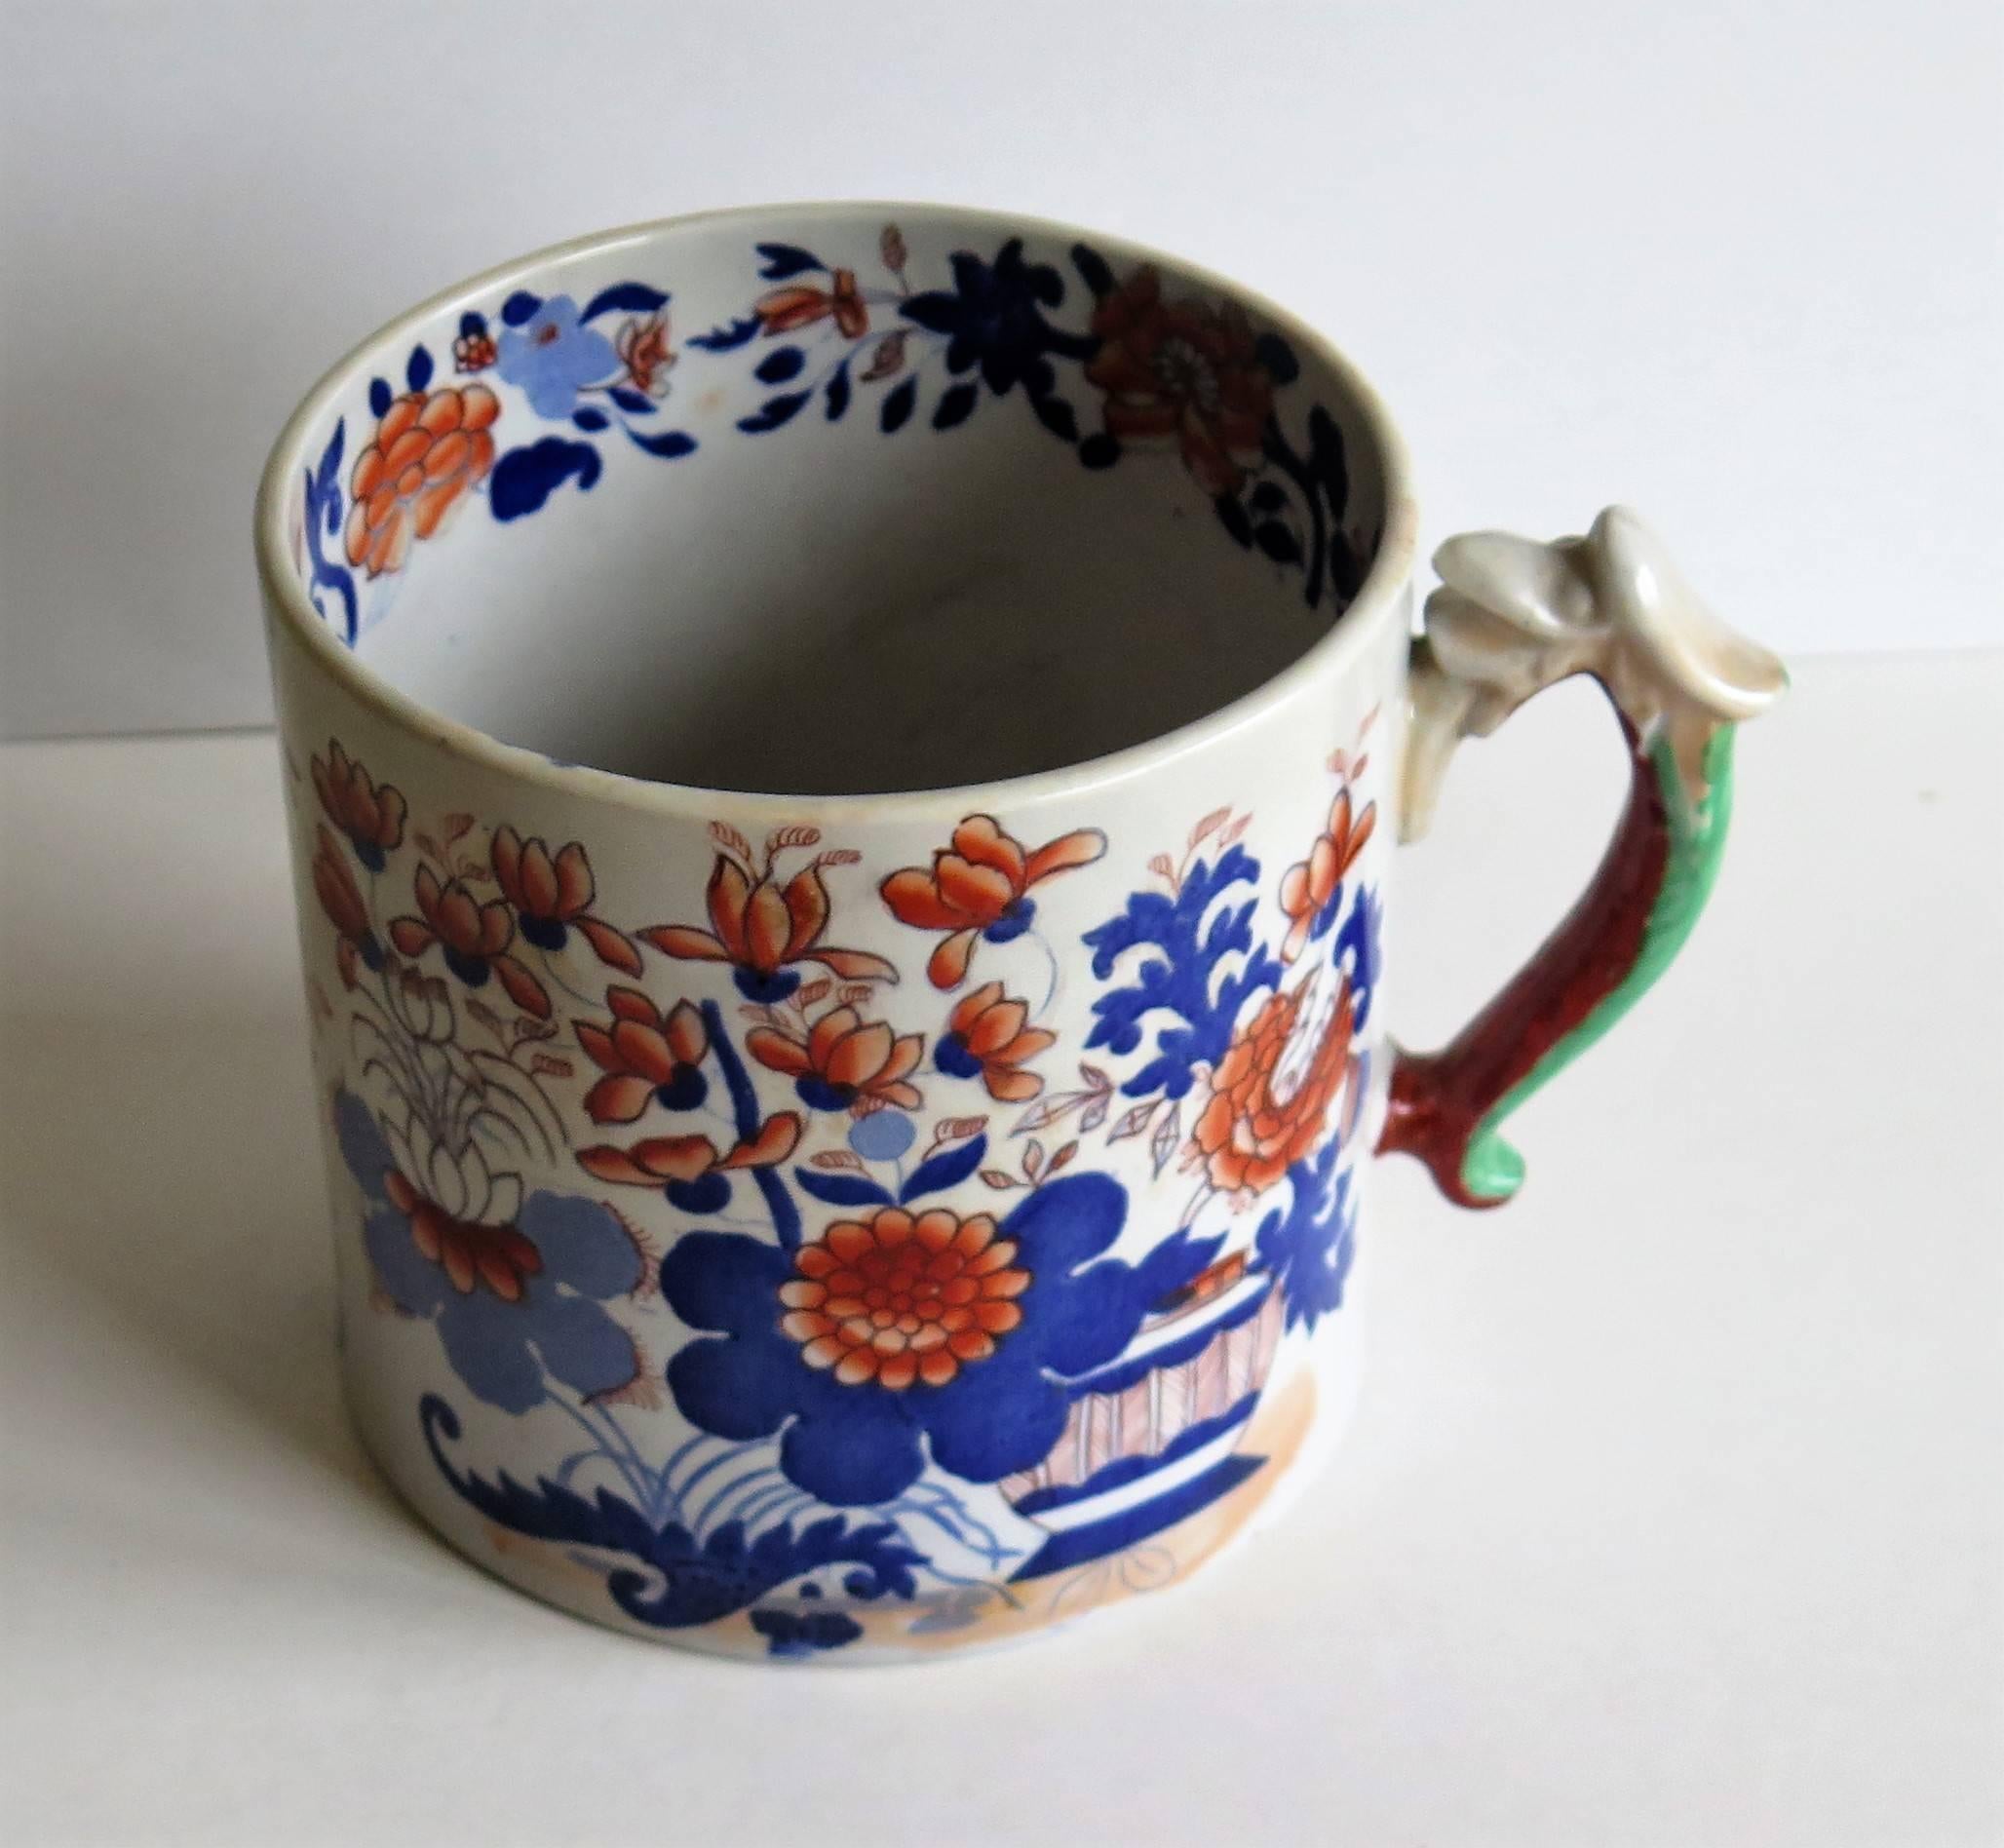 This is a rare and impressive early English Masons ironstone tankard.

We have not seen another Mason's tankard of this very large size before.

The tankard has a dolphin loop handle and is decorated in the highly collected, Imari Japan basket